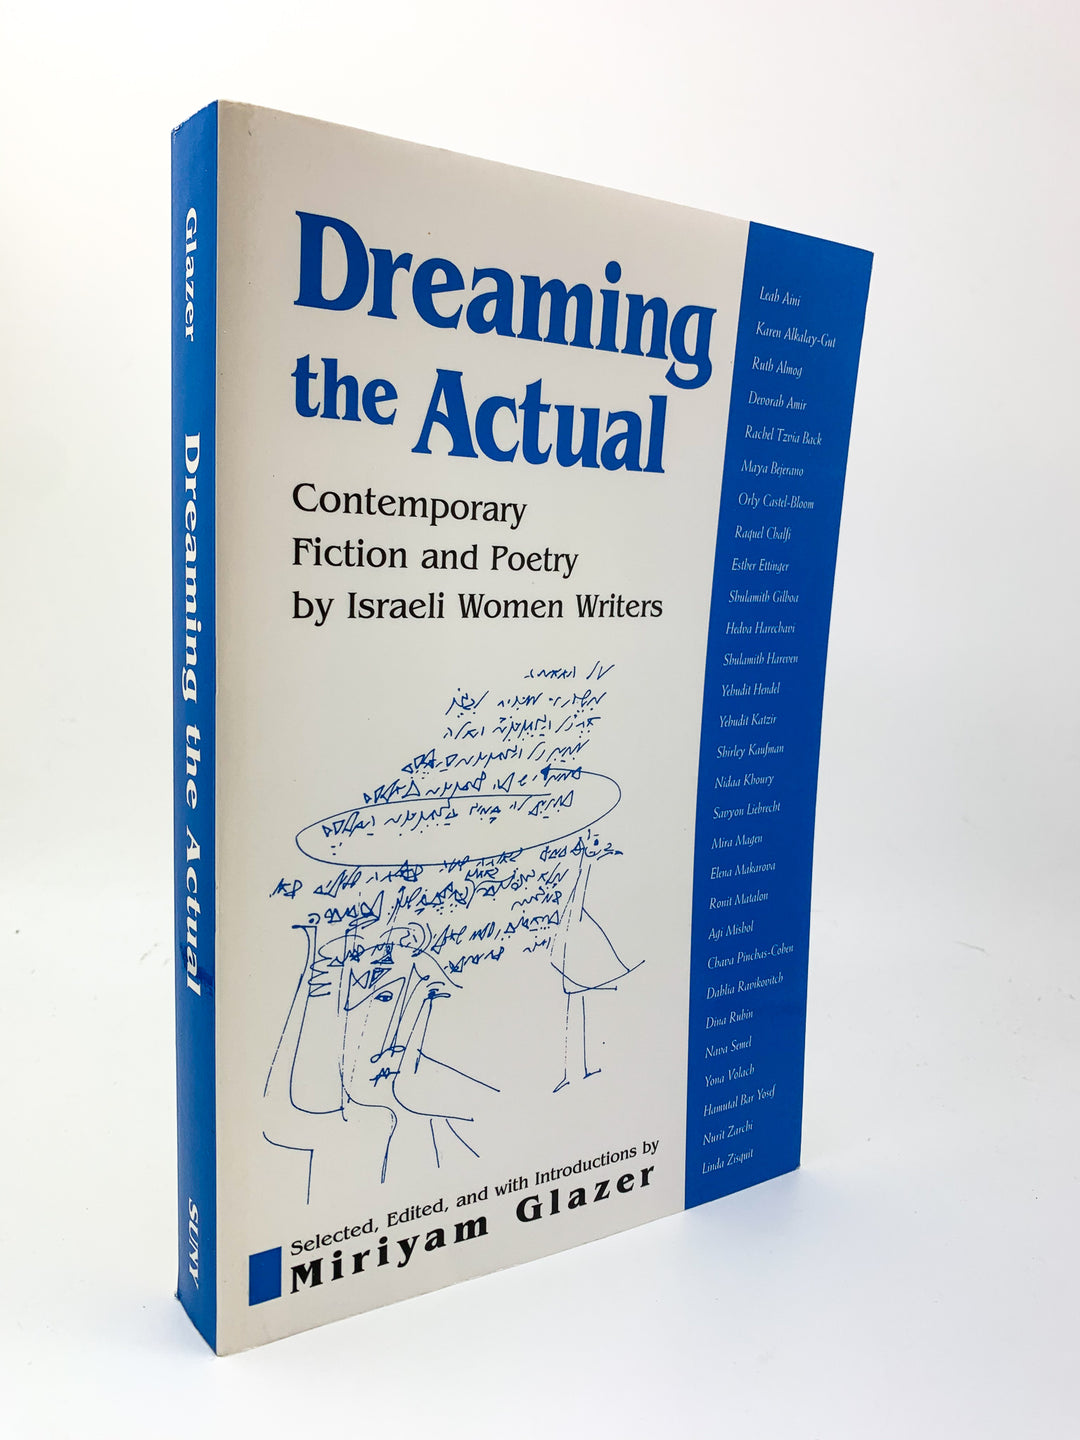 Glazer, Miriyam - Dreaming the Actual - Contemporary Fiction and Poetry by Israeli Women Writers | front cover